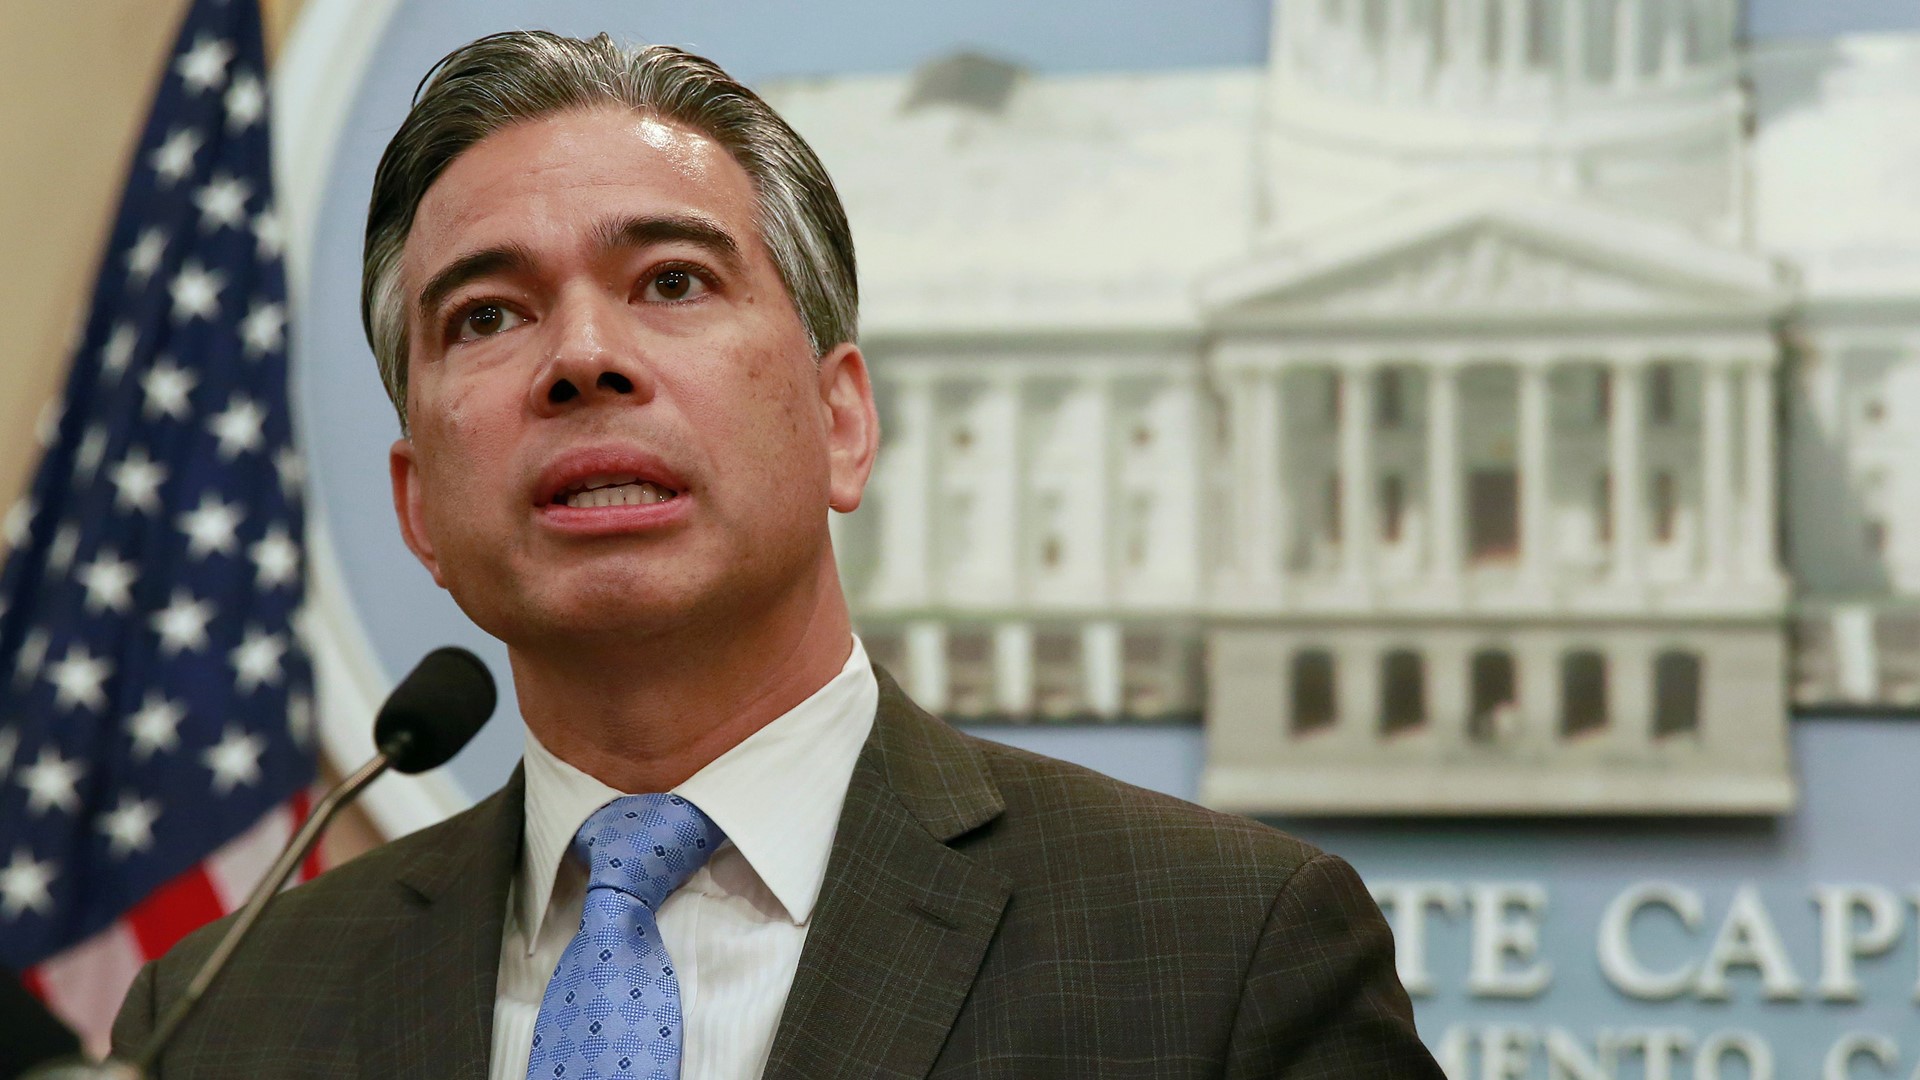 If approved by the State Legislature, Rob Bonta would be the first Filipino American to be California's Attorney General.